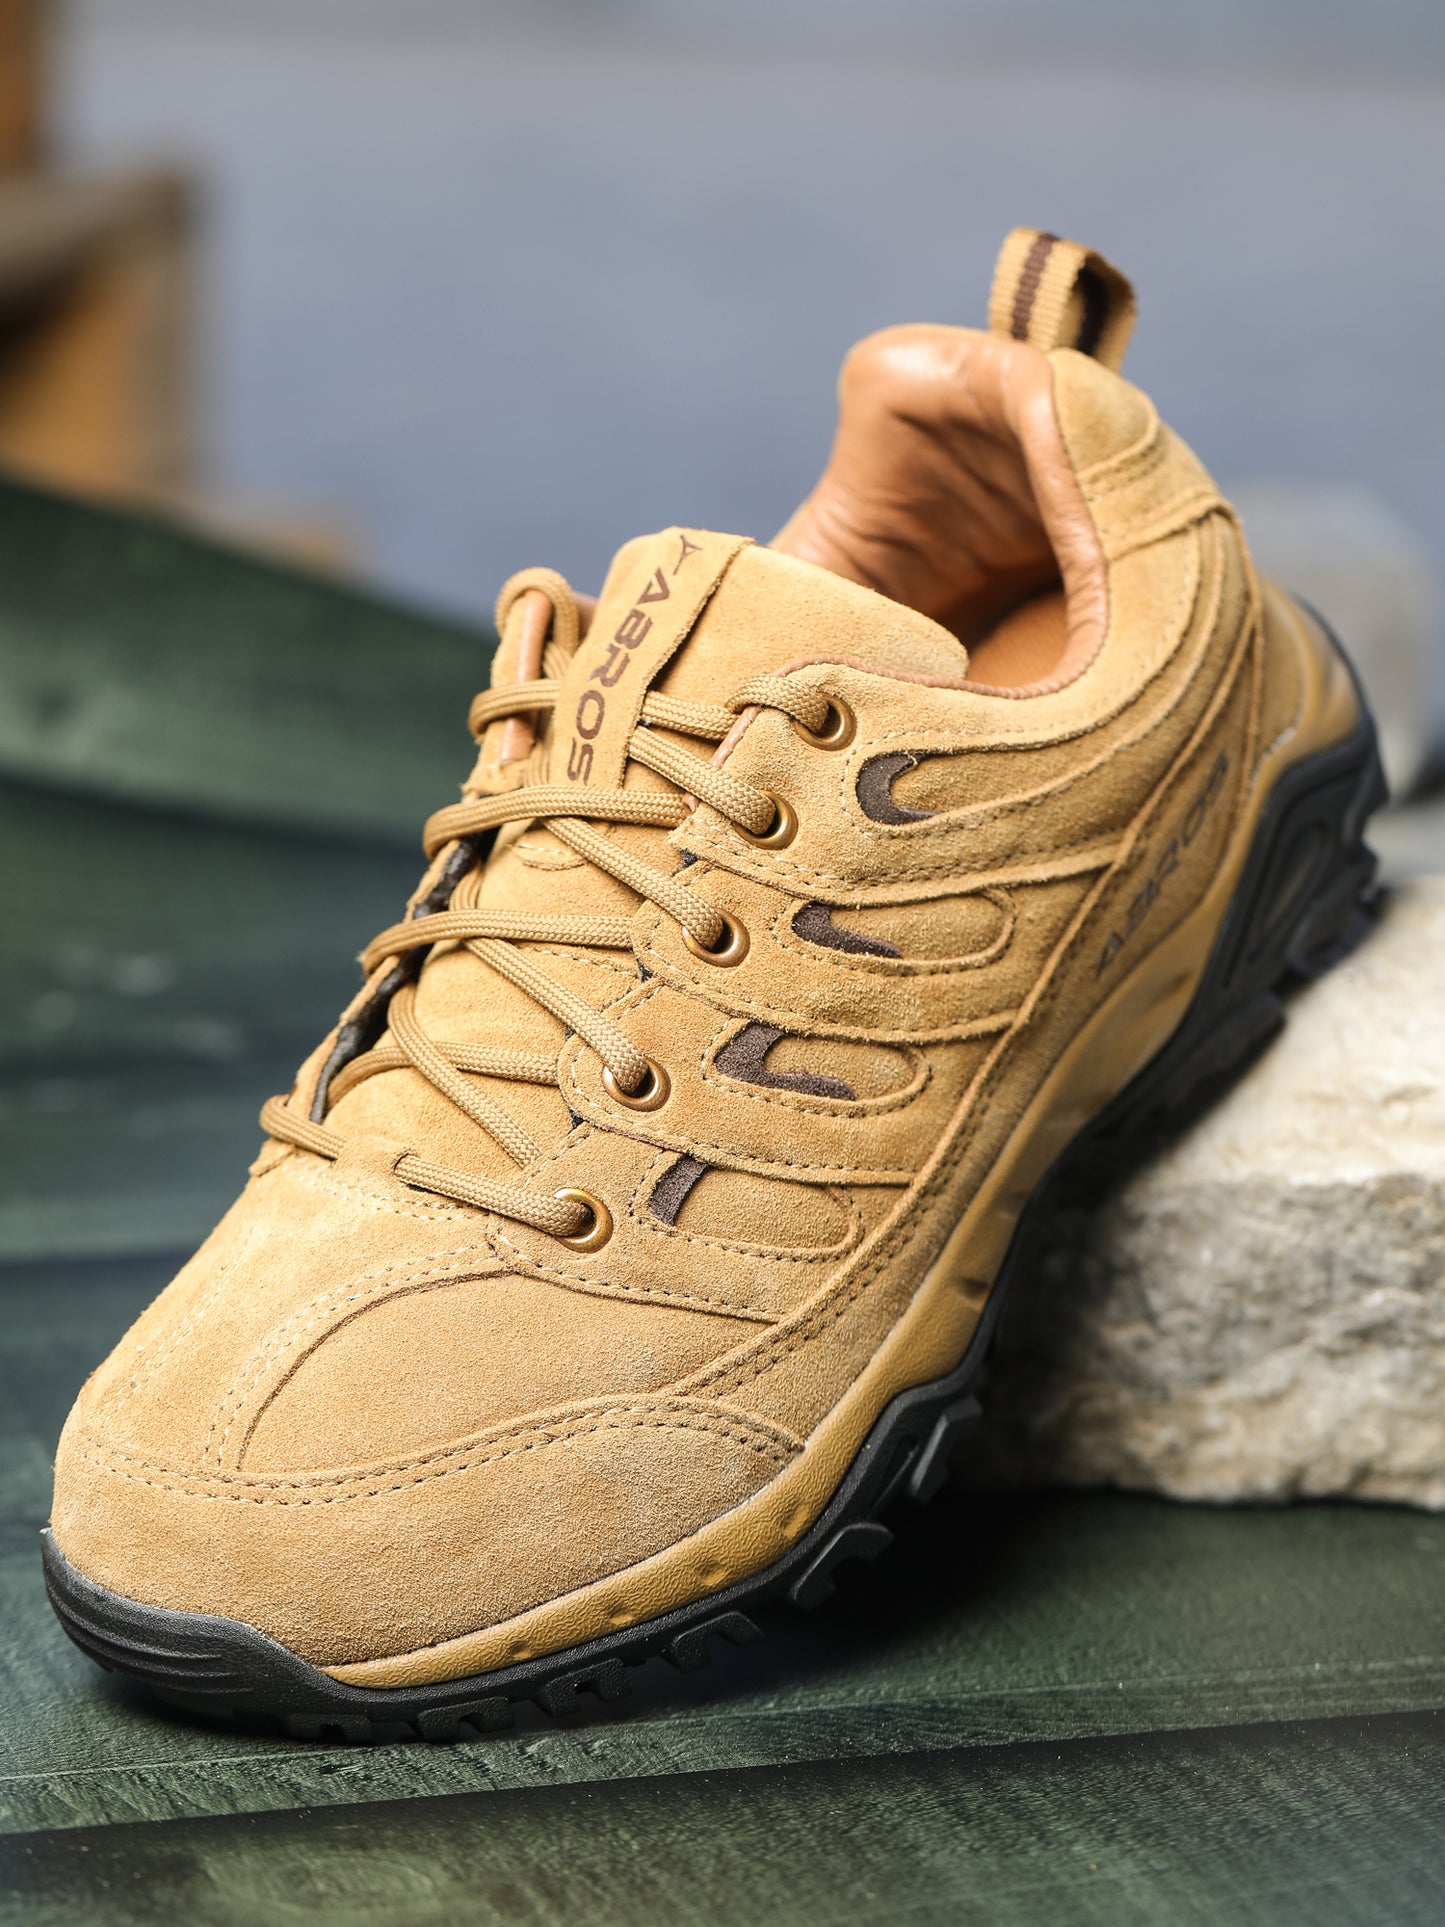 Lorenzoo Outdoor-Shoes For Men's